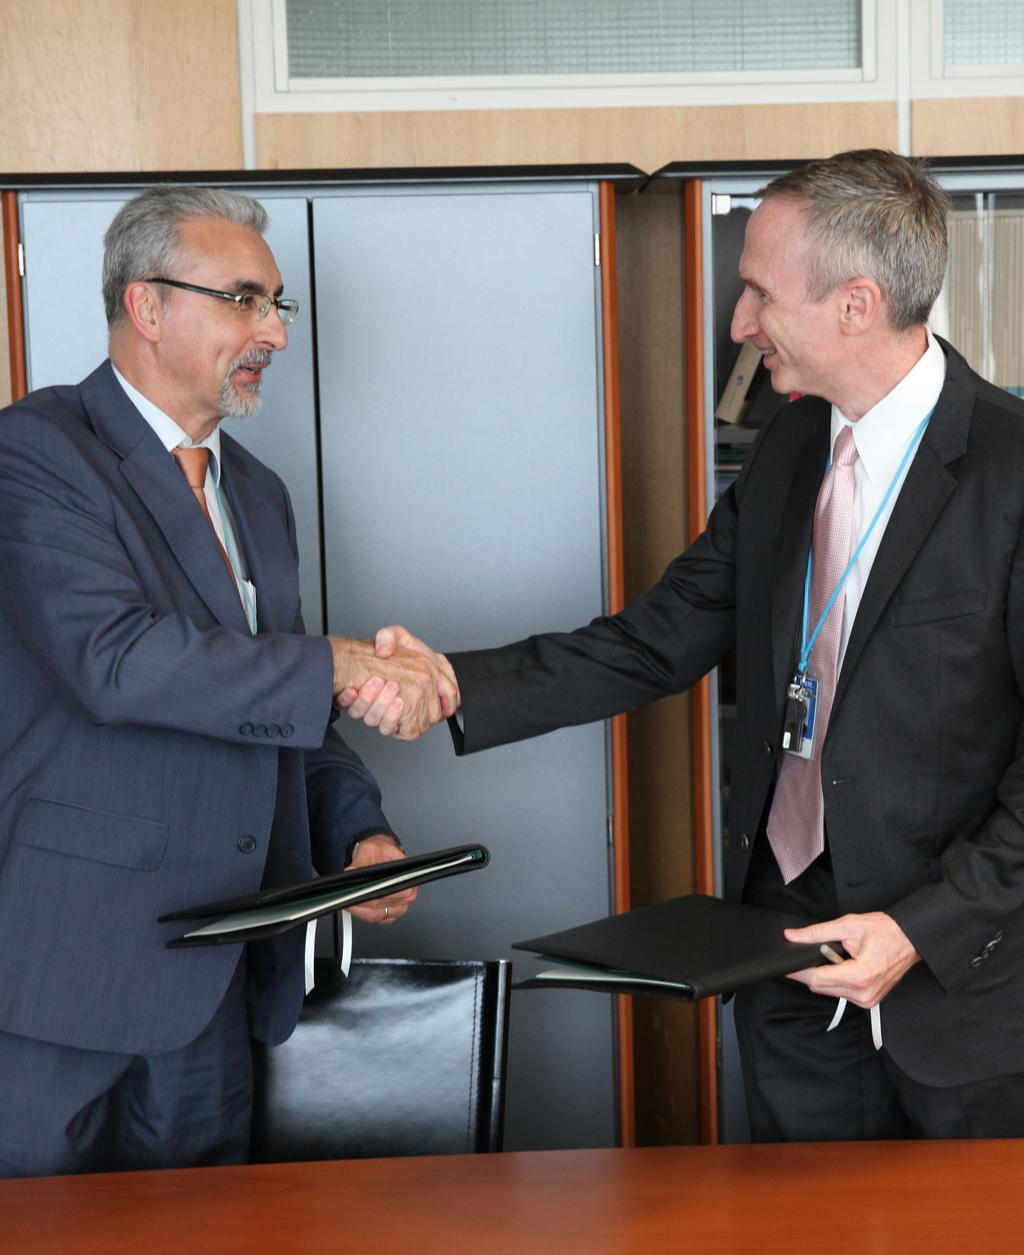 Juan Carlos Lentijo, Deputy Director General and Head of the IAEA Department of Nuclear Safety and Security, and Randy Bell, Director of the International Data Centre of the Comprehensive